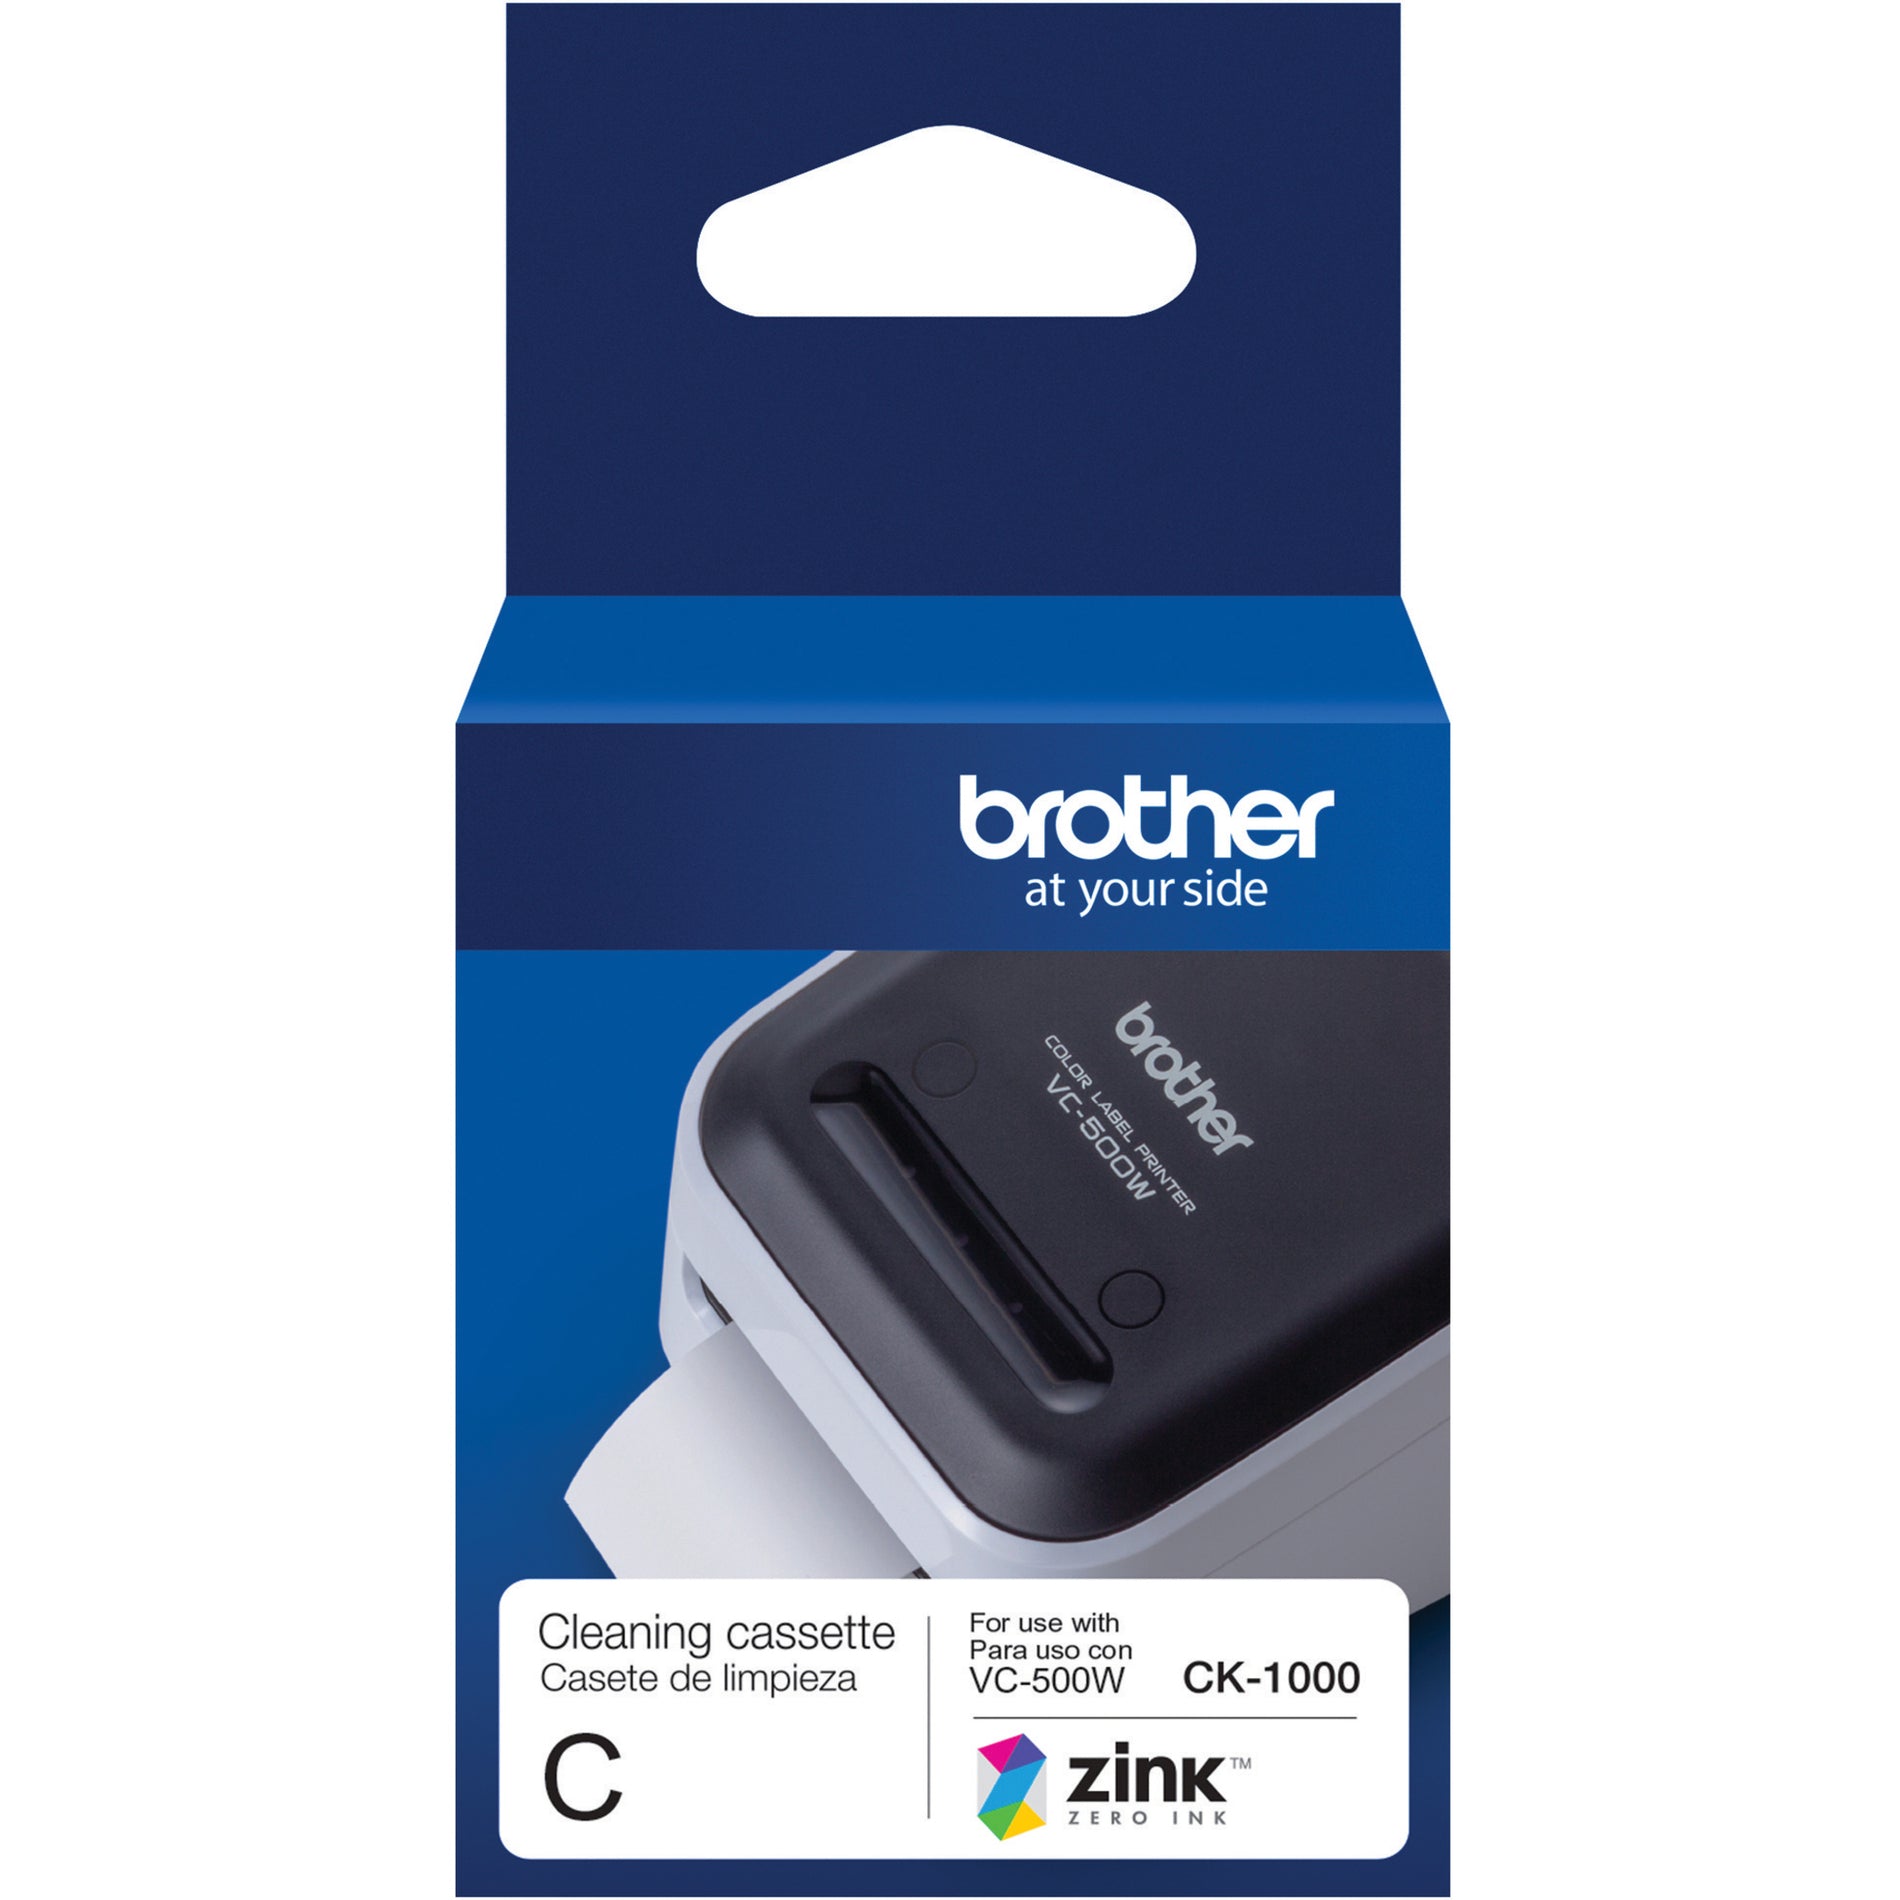 Brother CK-1000 Print Head Cleaning Roll, 50mm wide - Printer Head Cleaner